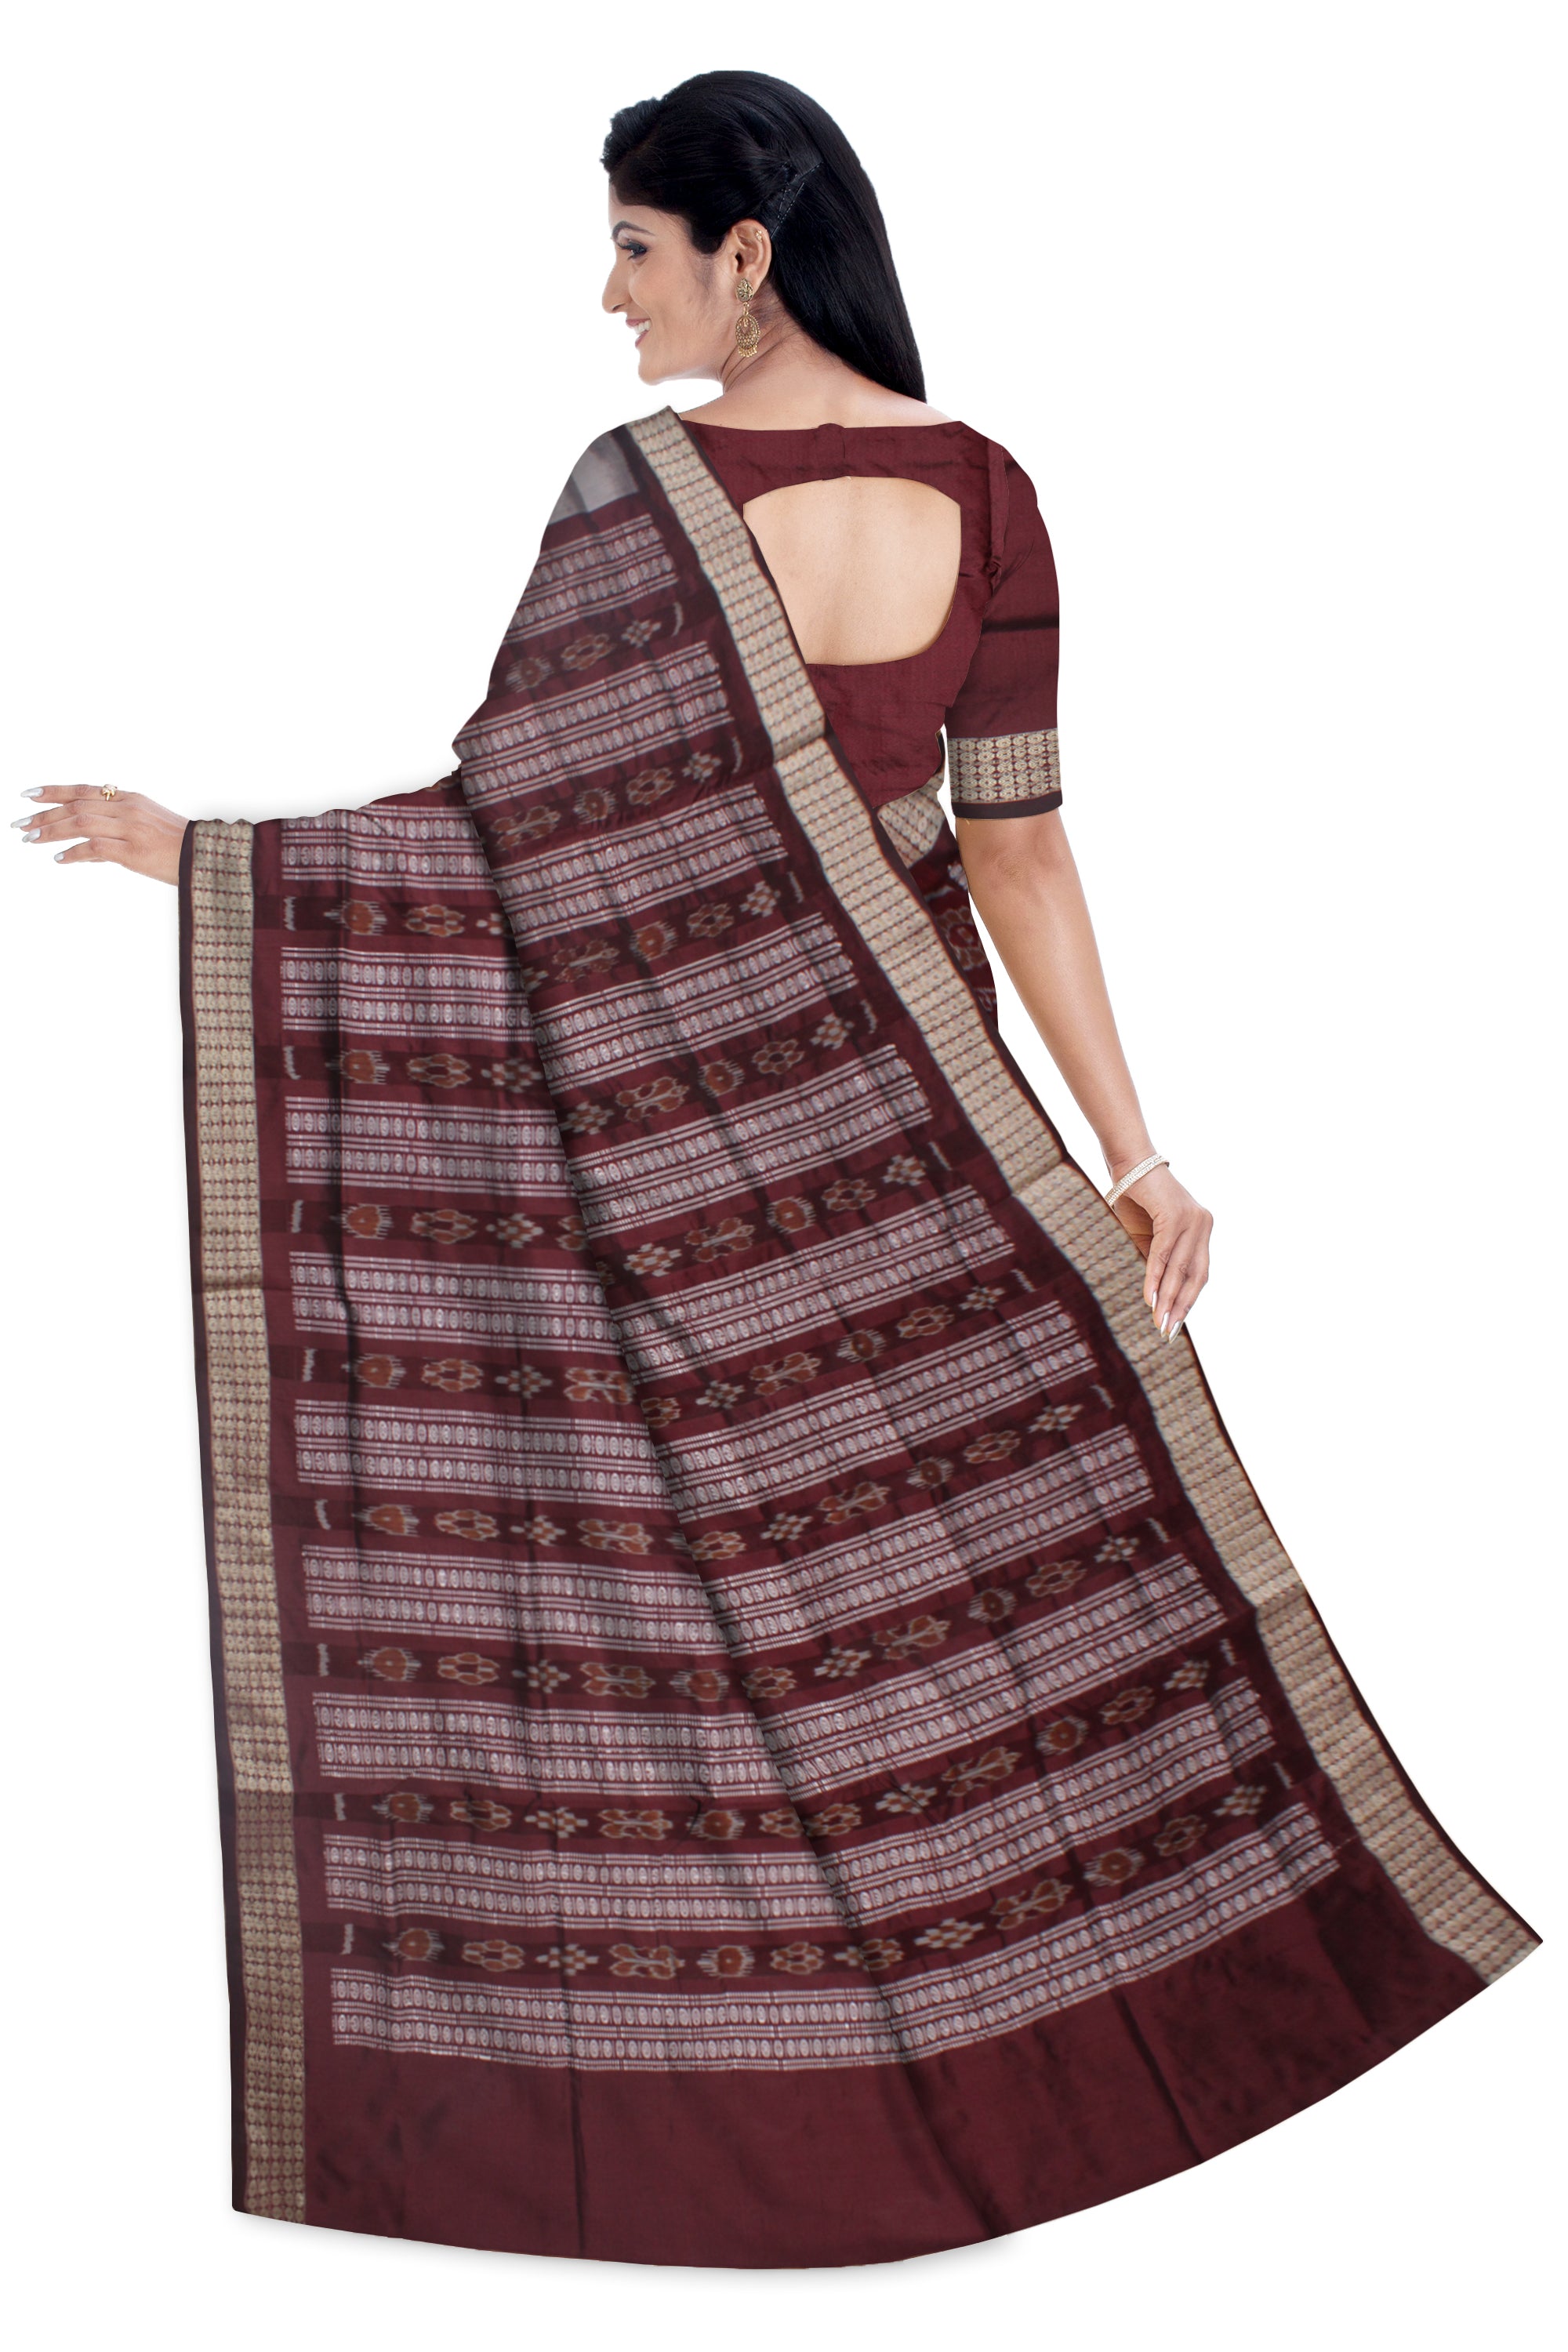 LATEST COLLECTION DOLL PRINT PATLI PATA SAREE IS SILVER AND COFFEE COLOR BASE, ATTACHED WITH MATCHING BLOUSE PIECE. - Koshali Arts & Crafts Enterprise